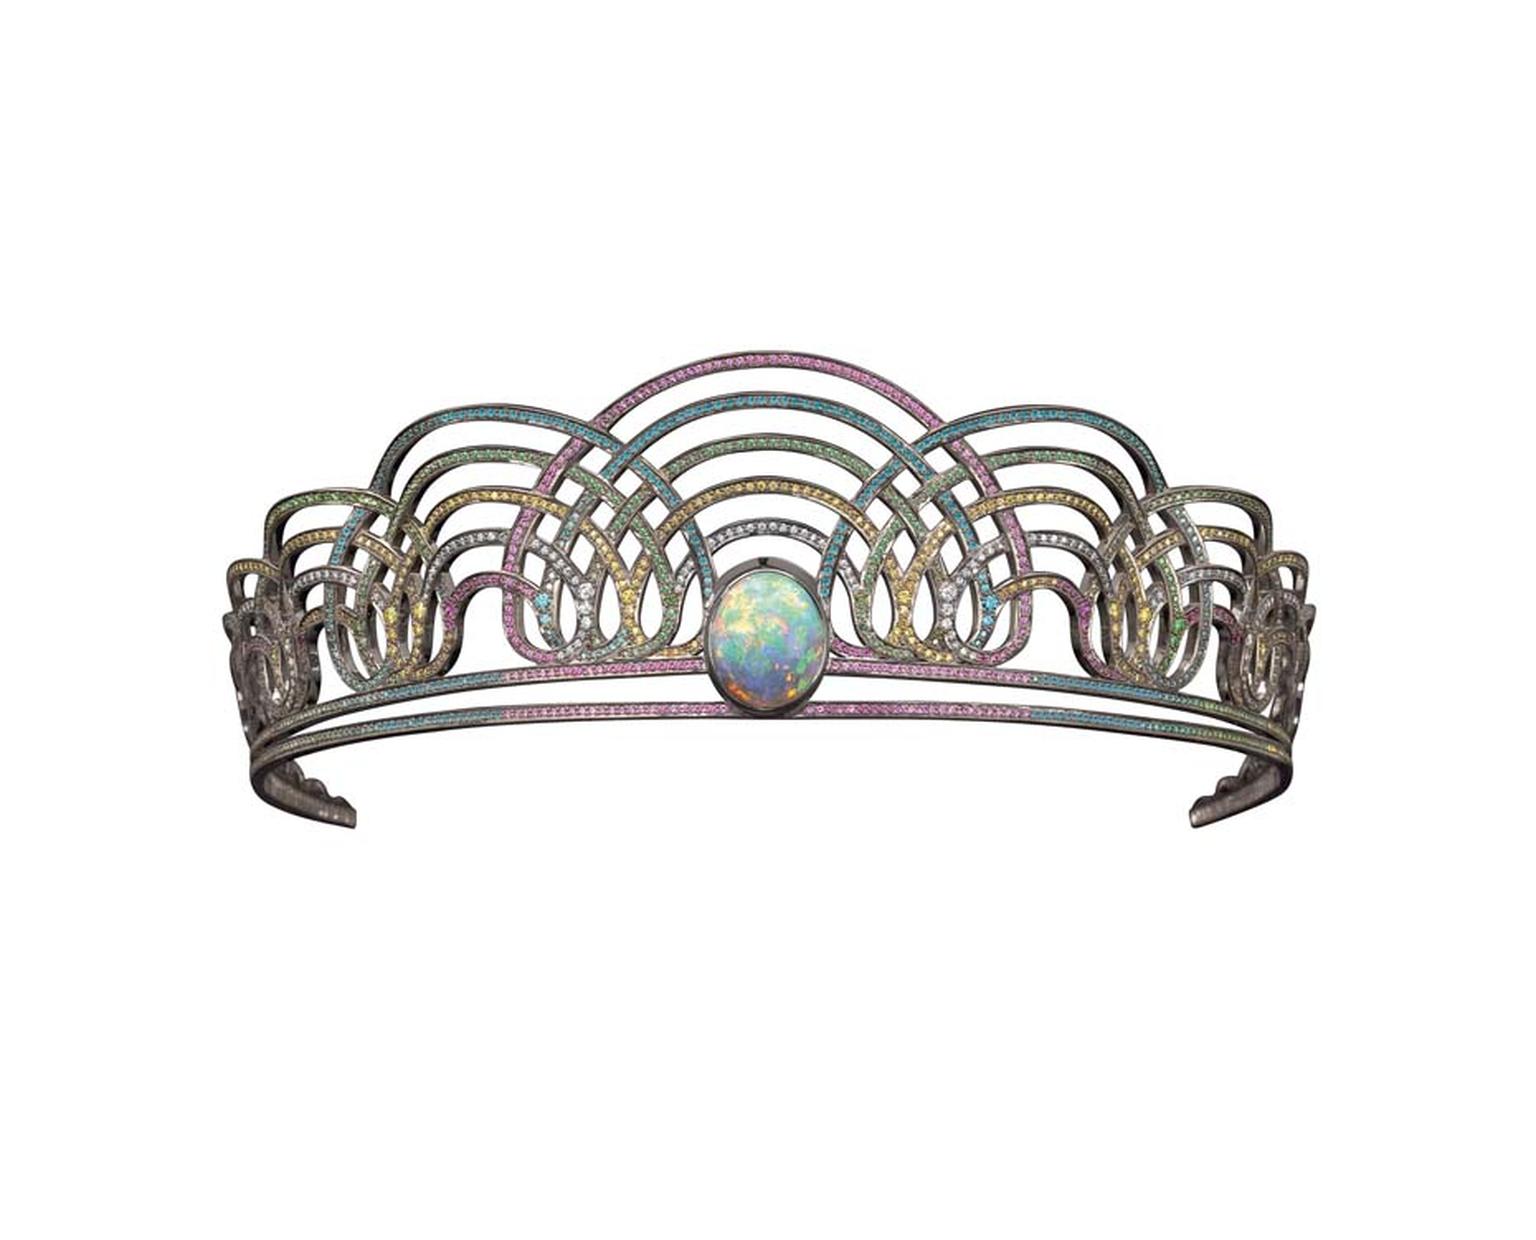 Solange Azagury-Partridge's Rainbow tiara, set with heat-treated diamonds, rubies, pink sapphires and a 9.60ct black opal in blackened white gold, is on sale at Paddle8's online auction with an estimate of £50,000-£70,000. To bid now, follow the link in t